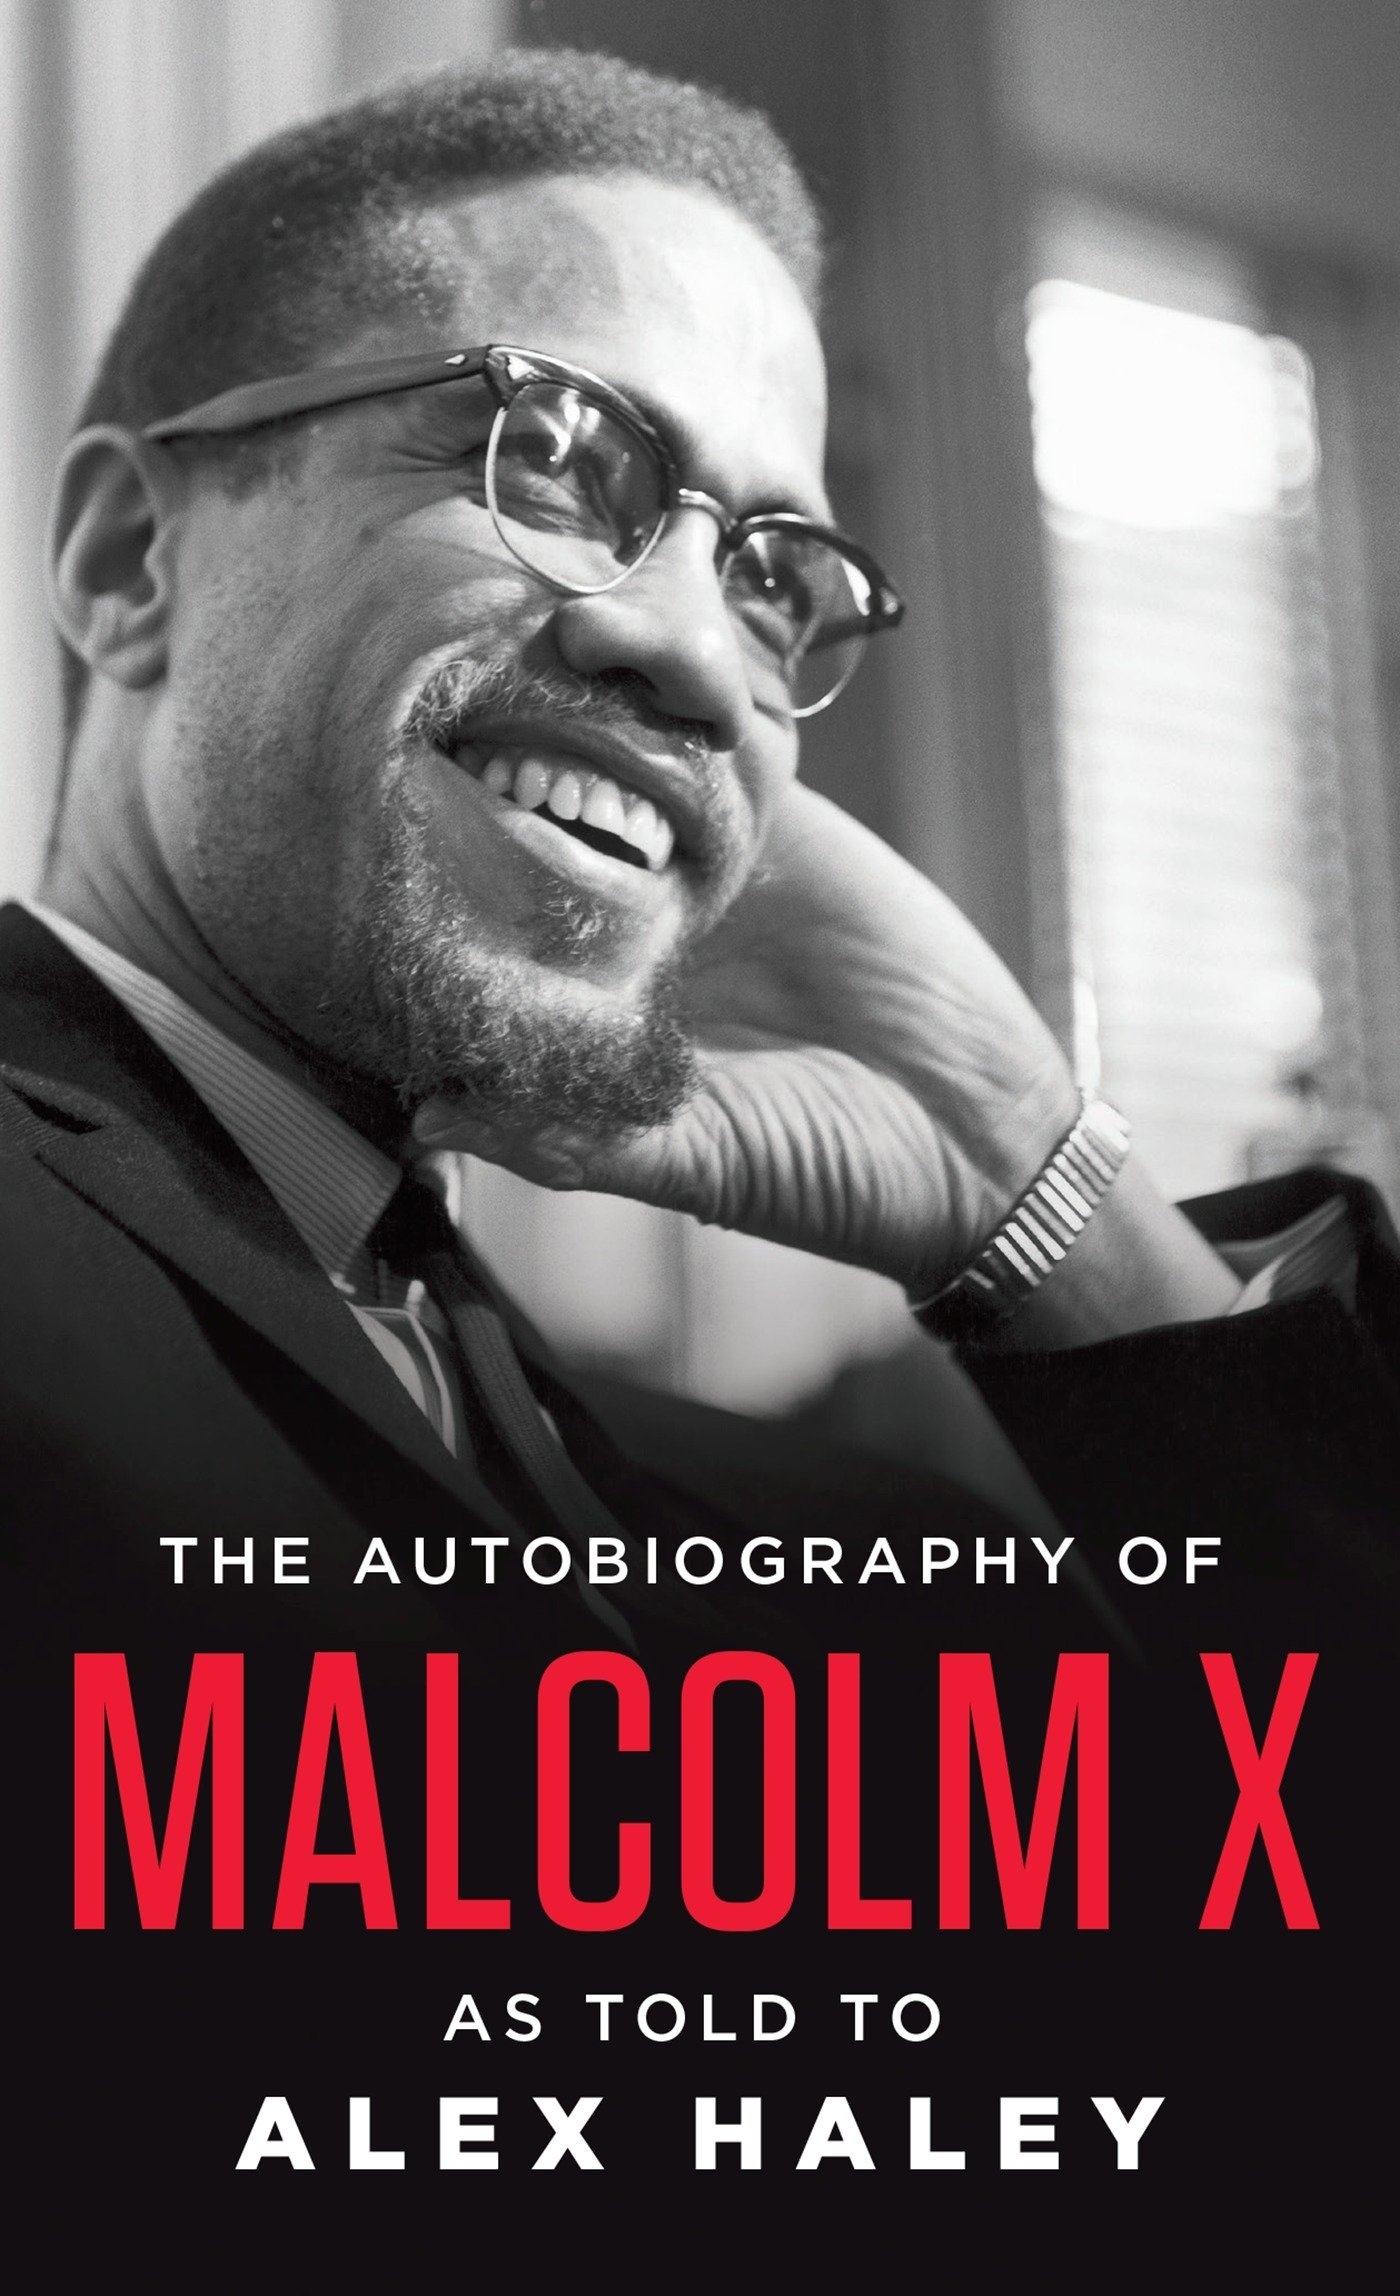 The Autobiography of Malcolm X by Malcolm X and Alex Haley